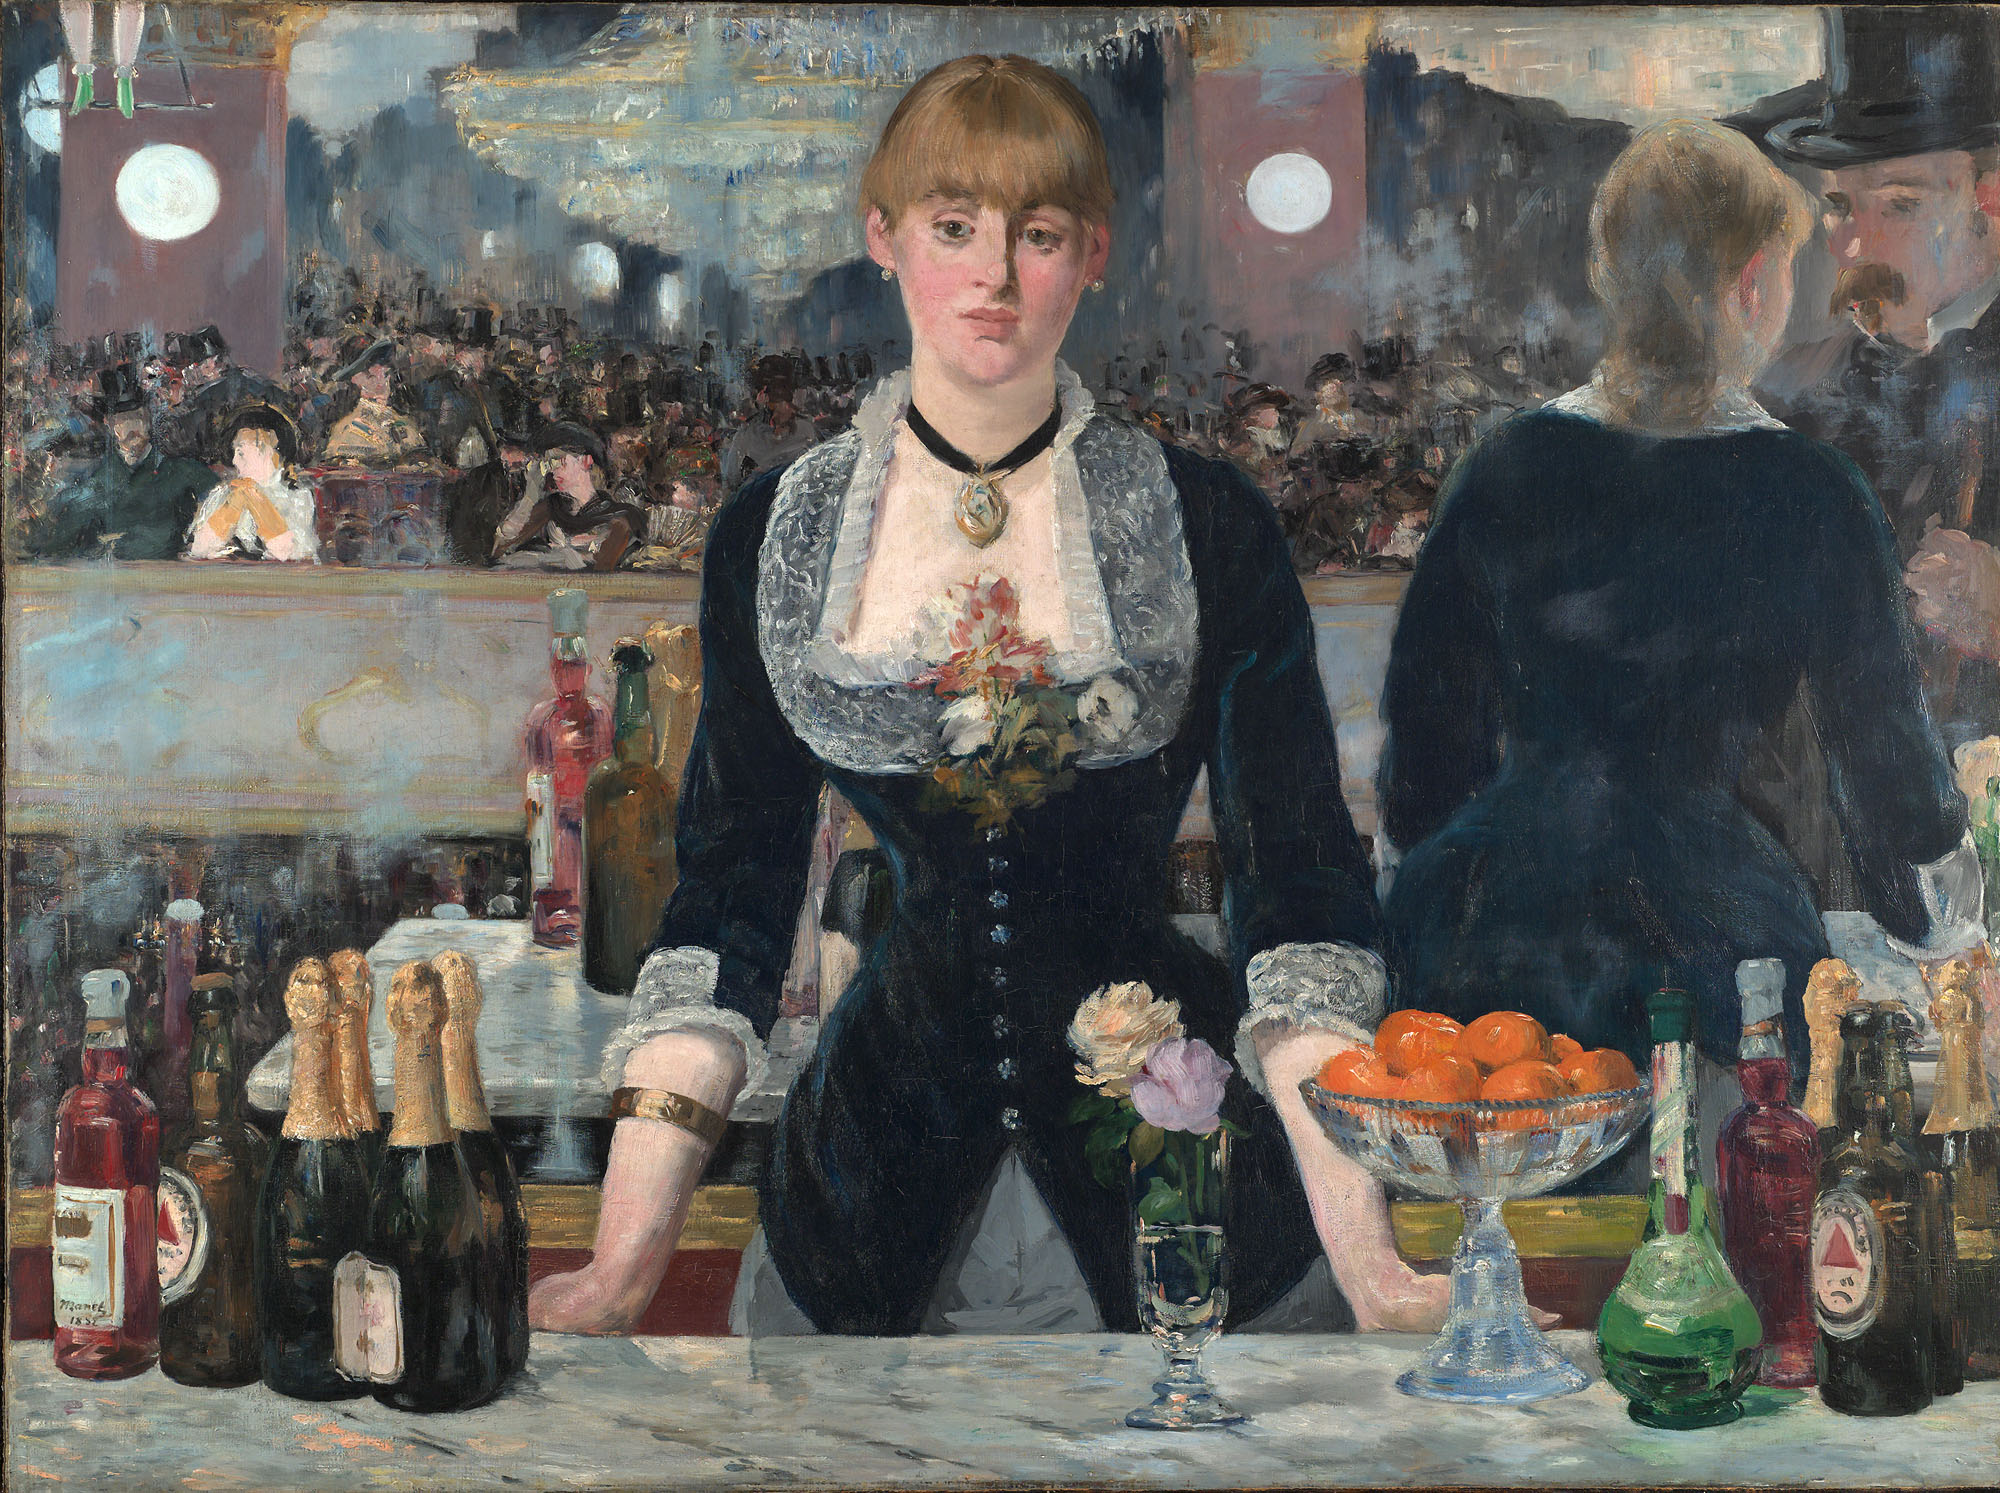 A Bar at the Folies-Bergére by Édouard Manet - 1882 - 96 x 130 cm The Courtauld Gallery